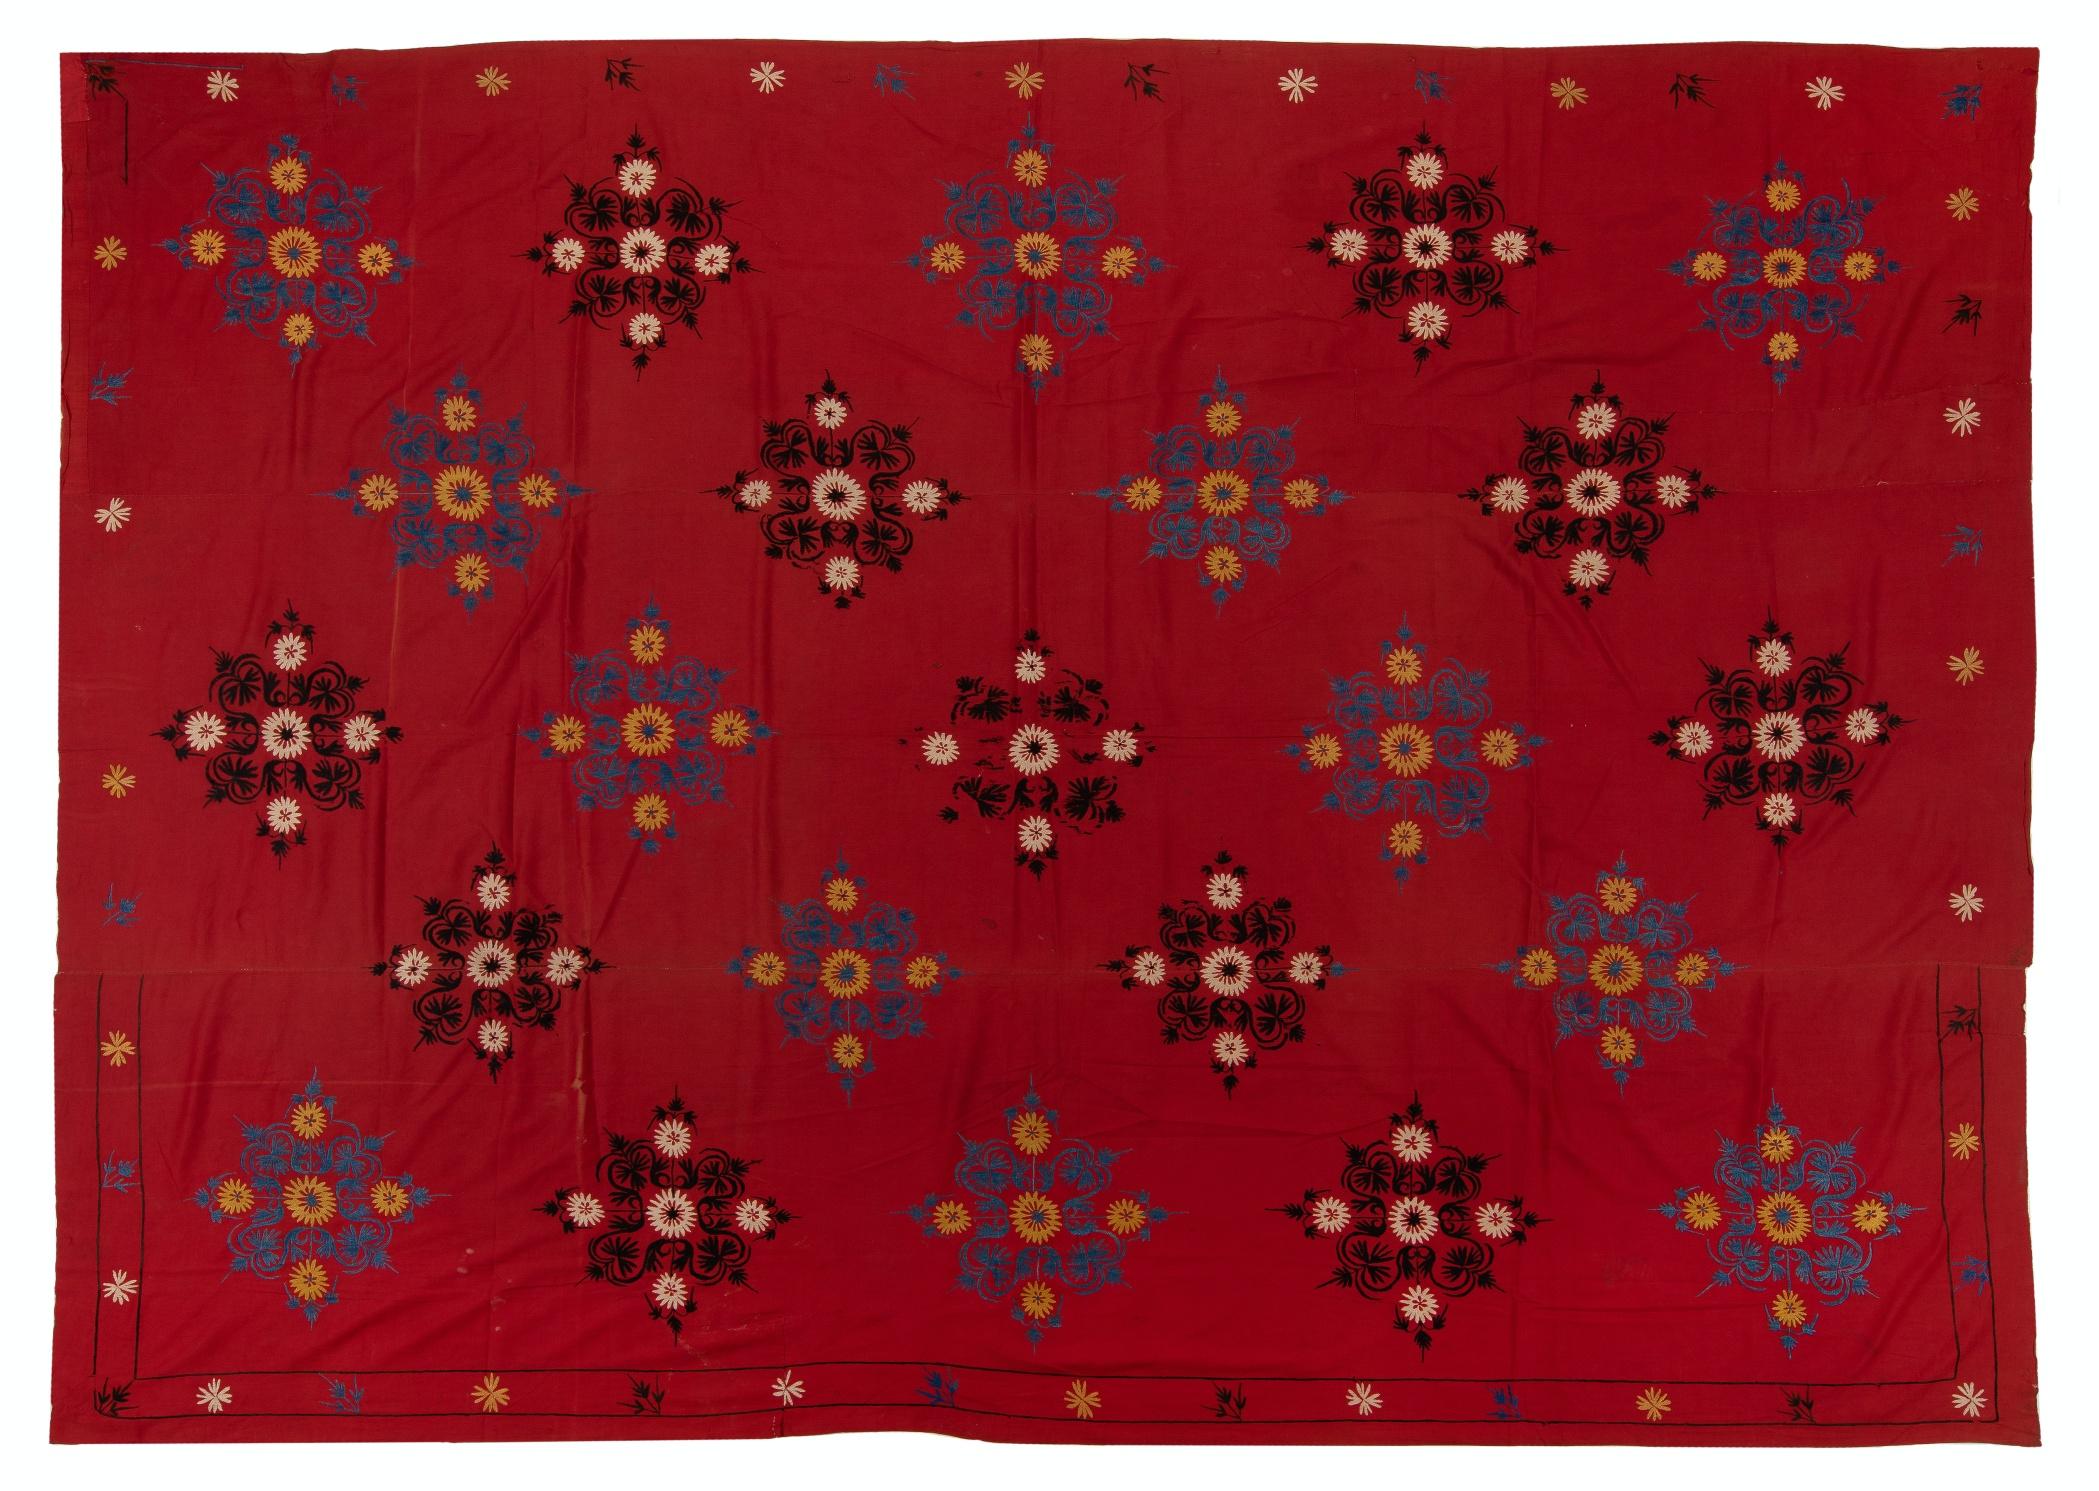 6.7x8.7 Ft Hand Embroidered Silk Wall Hanging, Red Bedspread, Suzani Tablecloth For Sale 1